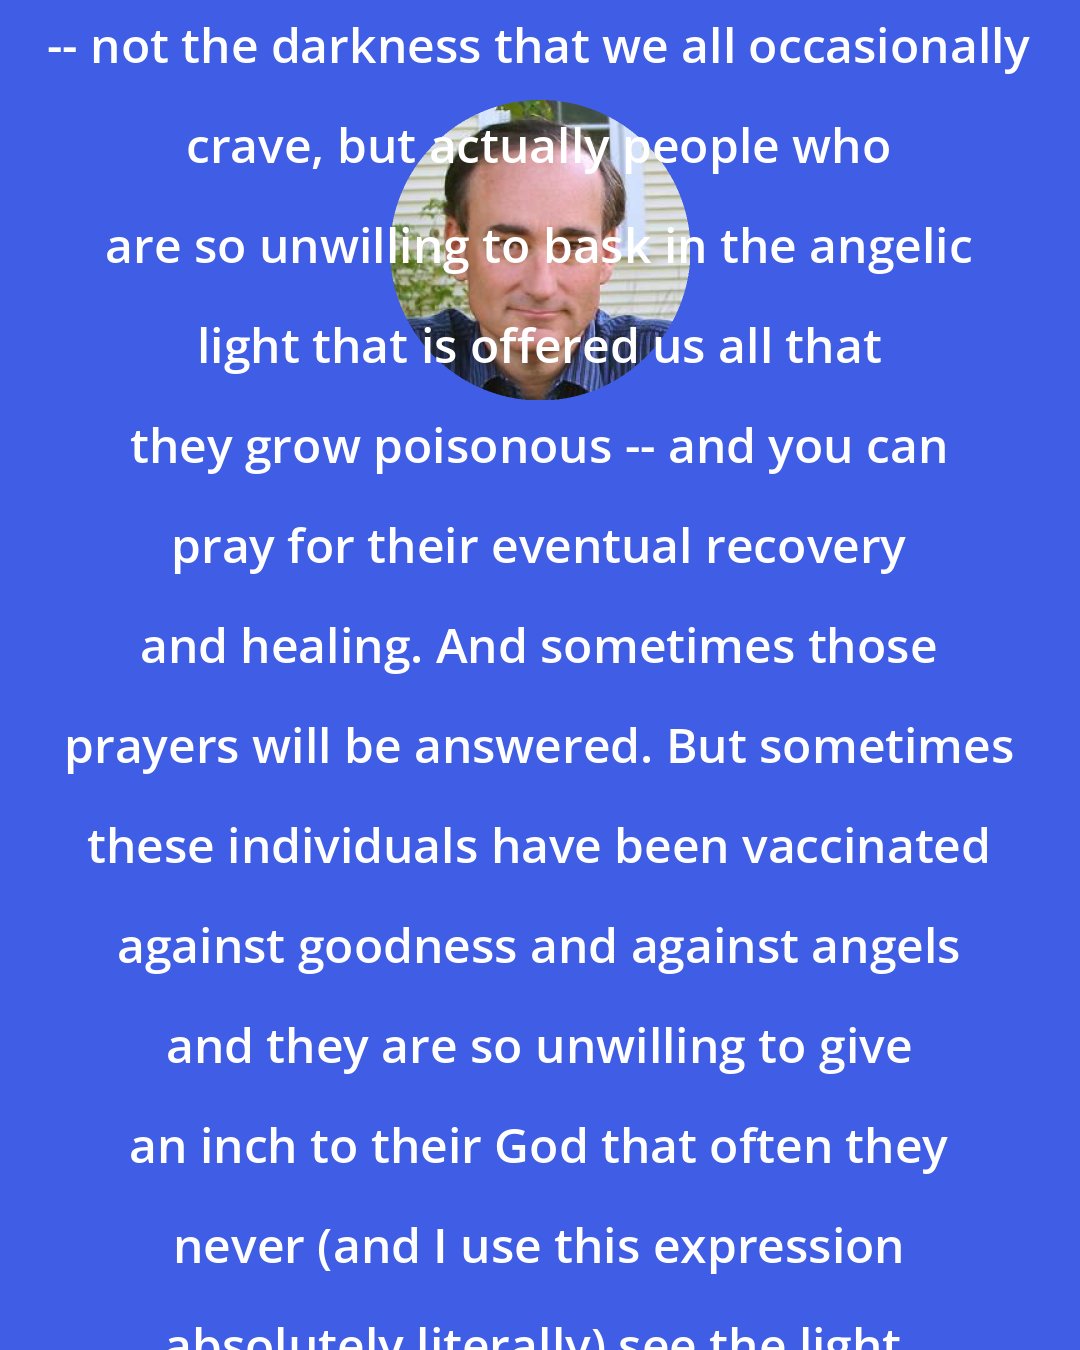 Chris Bohjalian: The world is filled with human toxins -- not the darkness that we all occasionally crave, but actually people who are so unwilling to bask in the angelic light that is offered us all that they grow poisonous -- and you can pray for their eventual recovery and healing. And sometimes those prayers will be answered. But sometimes these individuals have been vaccinated against goodness and against angels and they are so unwilling to give an inch to their God that often they never (and I use this expression absolutely literally) see the light.